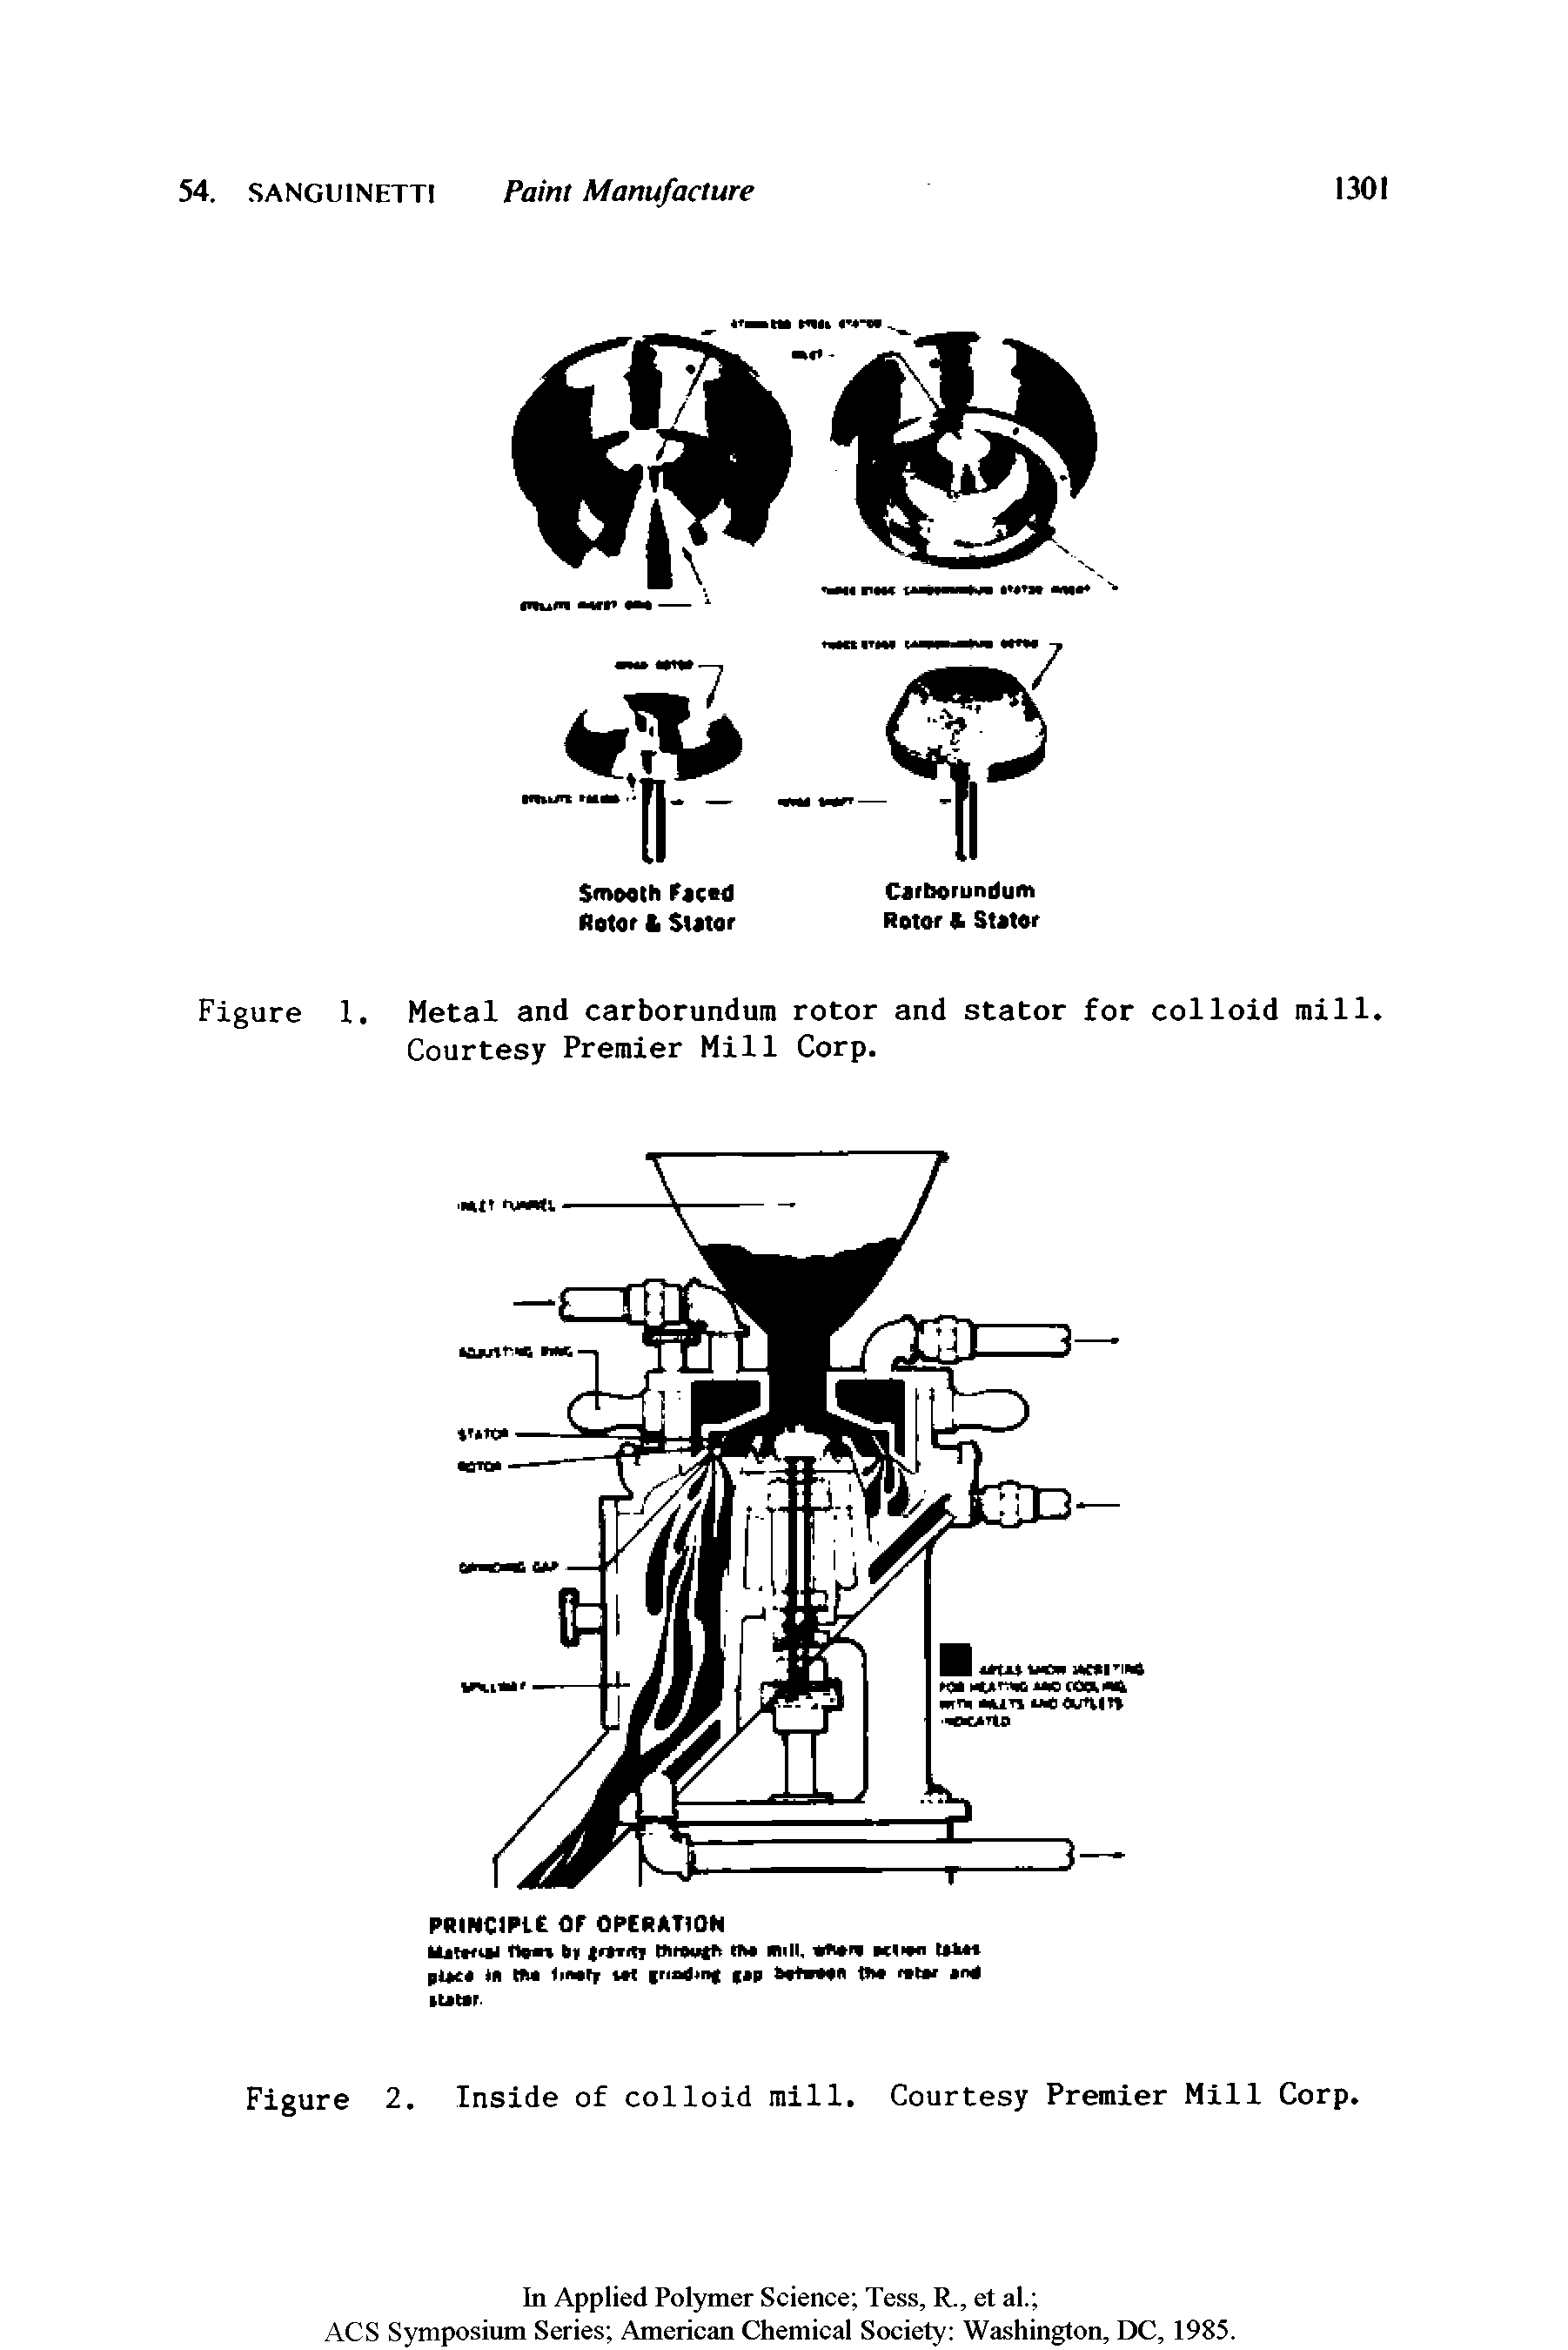 Figure 1. Metal and carborundum rotor and stator for colloid mill. Courtesy Premier Mill Corp.